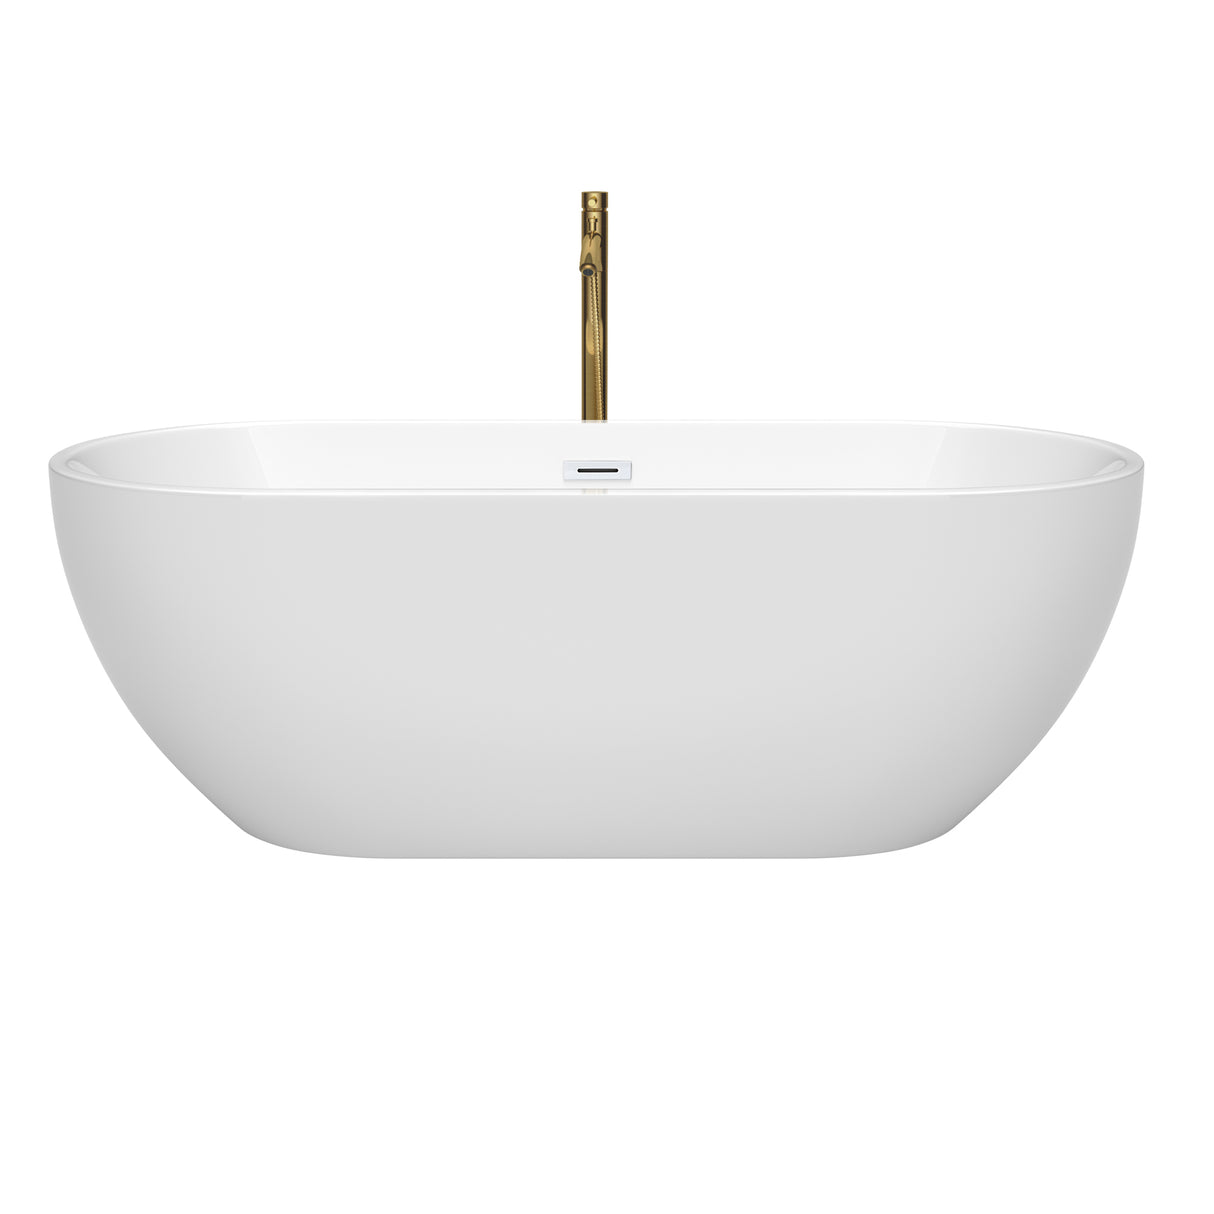 Brooklyn 67 Inch Freestanding Bathtub in White with Shiny White Trim and Floor Mounted Faucet in Brushed Gold